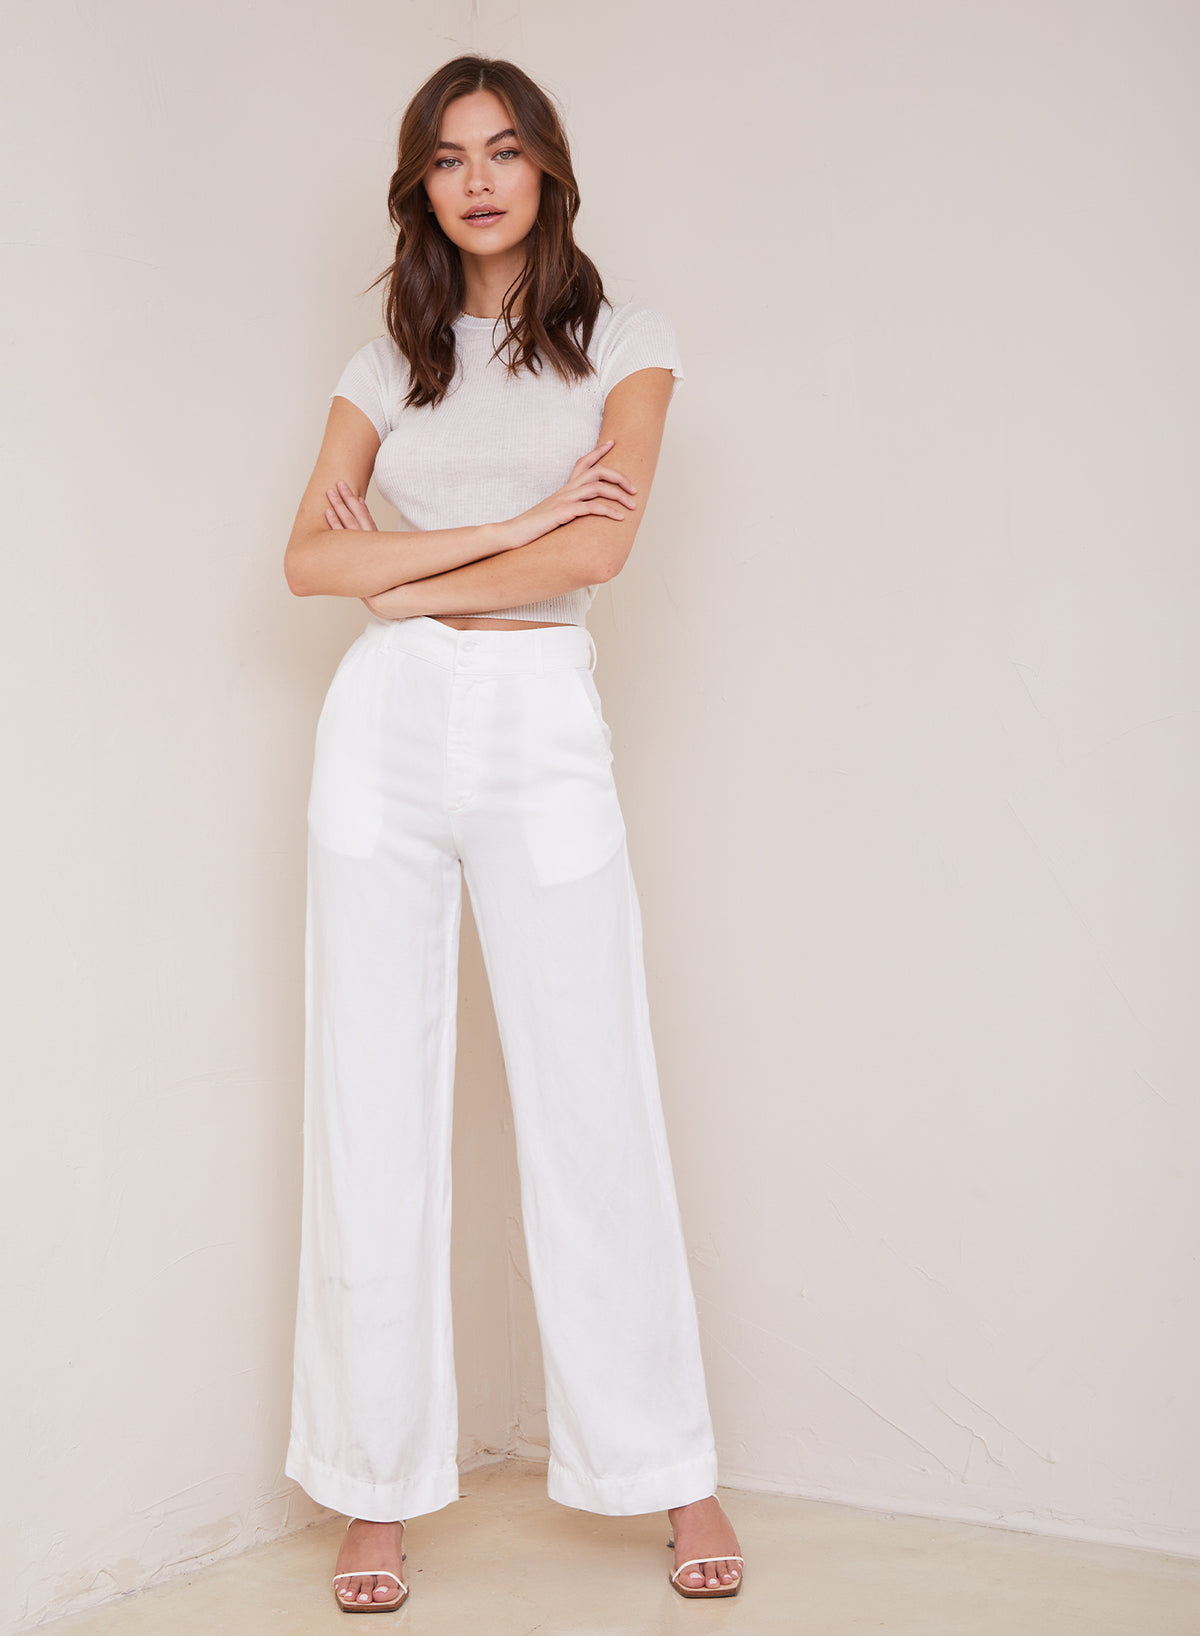 White wide leg trouser with zip fly and button fastening with slant side pockets and rear patch pockets